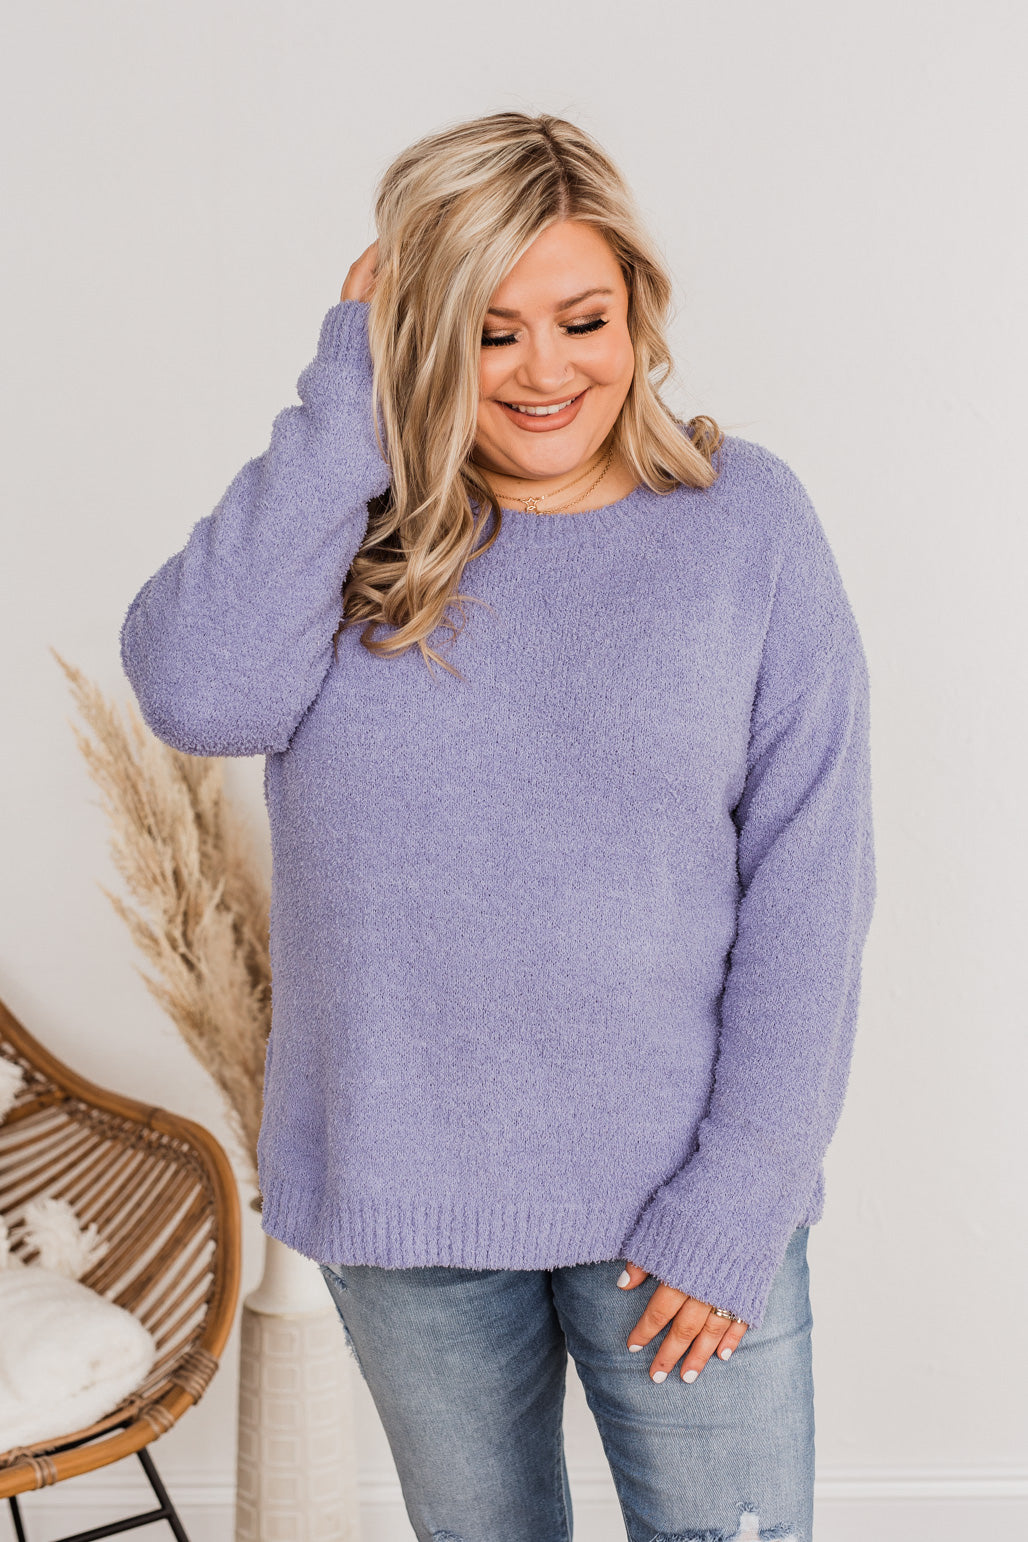 Wrapped Up In Your Warmth Knit Sweater- Purple